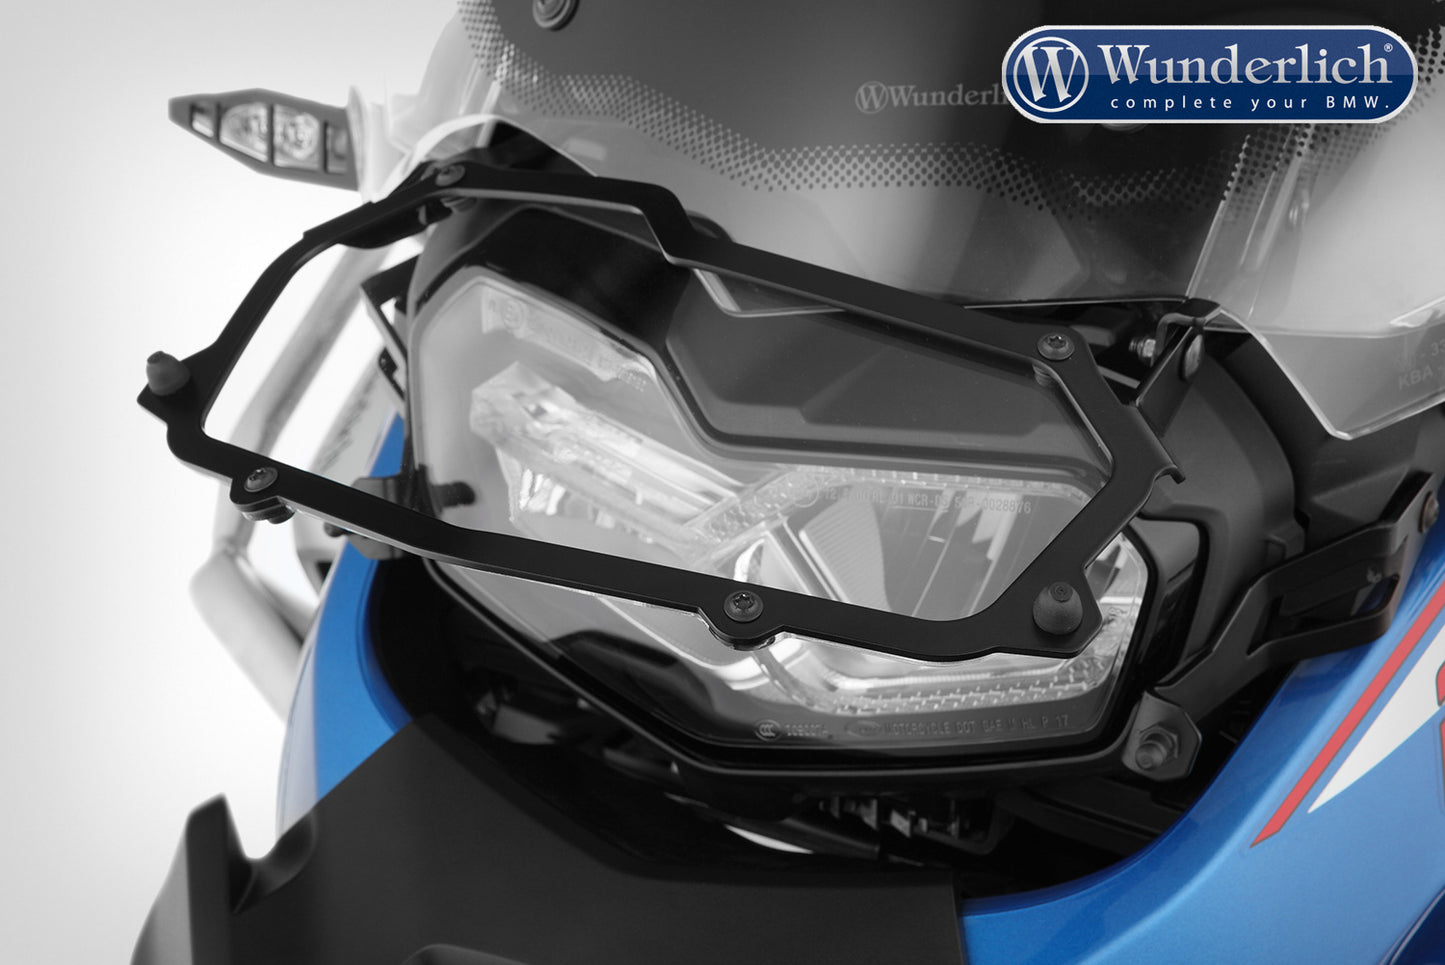 Wunderlich headlight protection grille, foldable, »CLEAR« for F850 GS - black